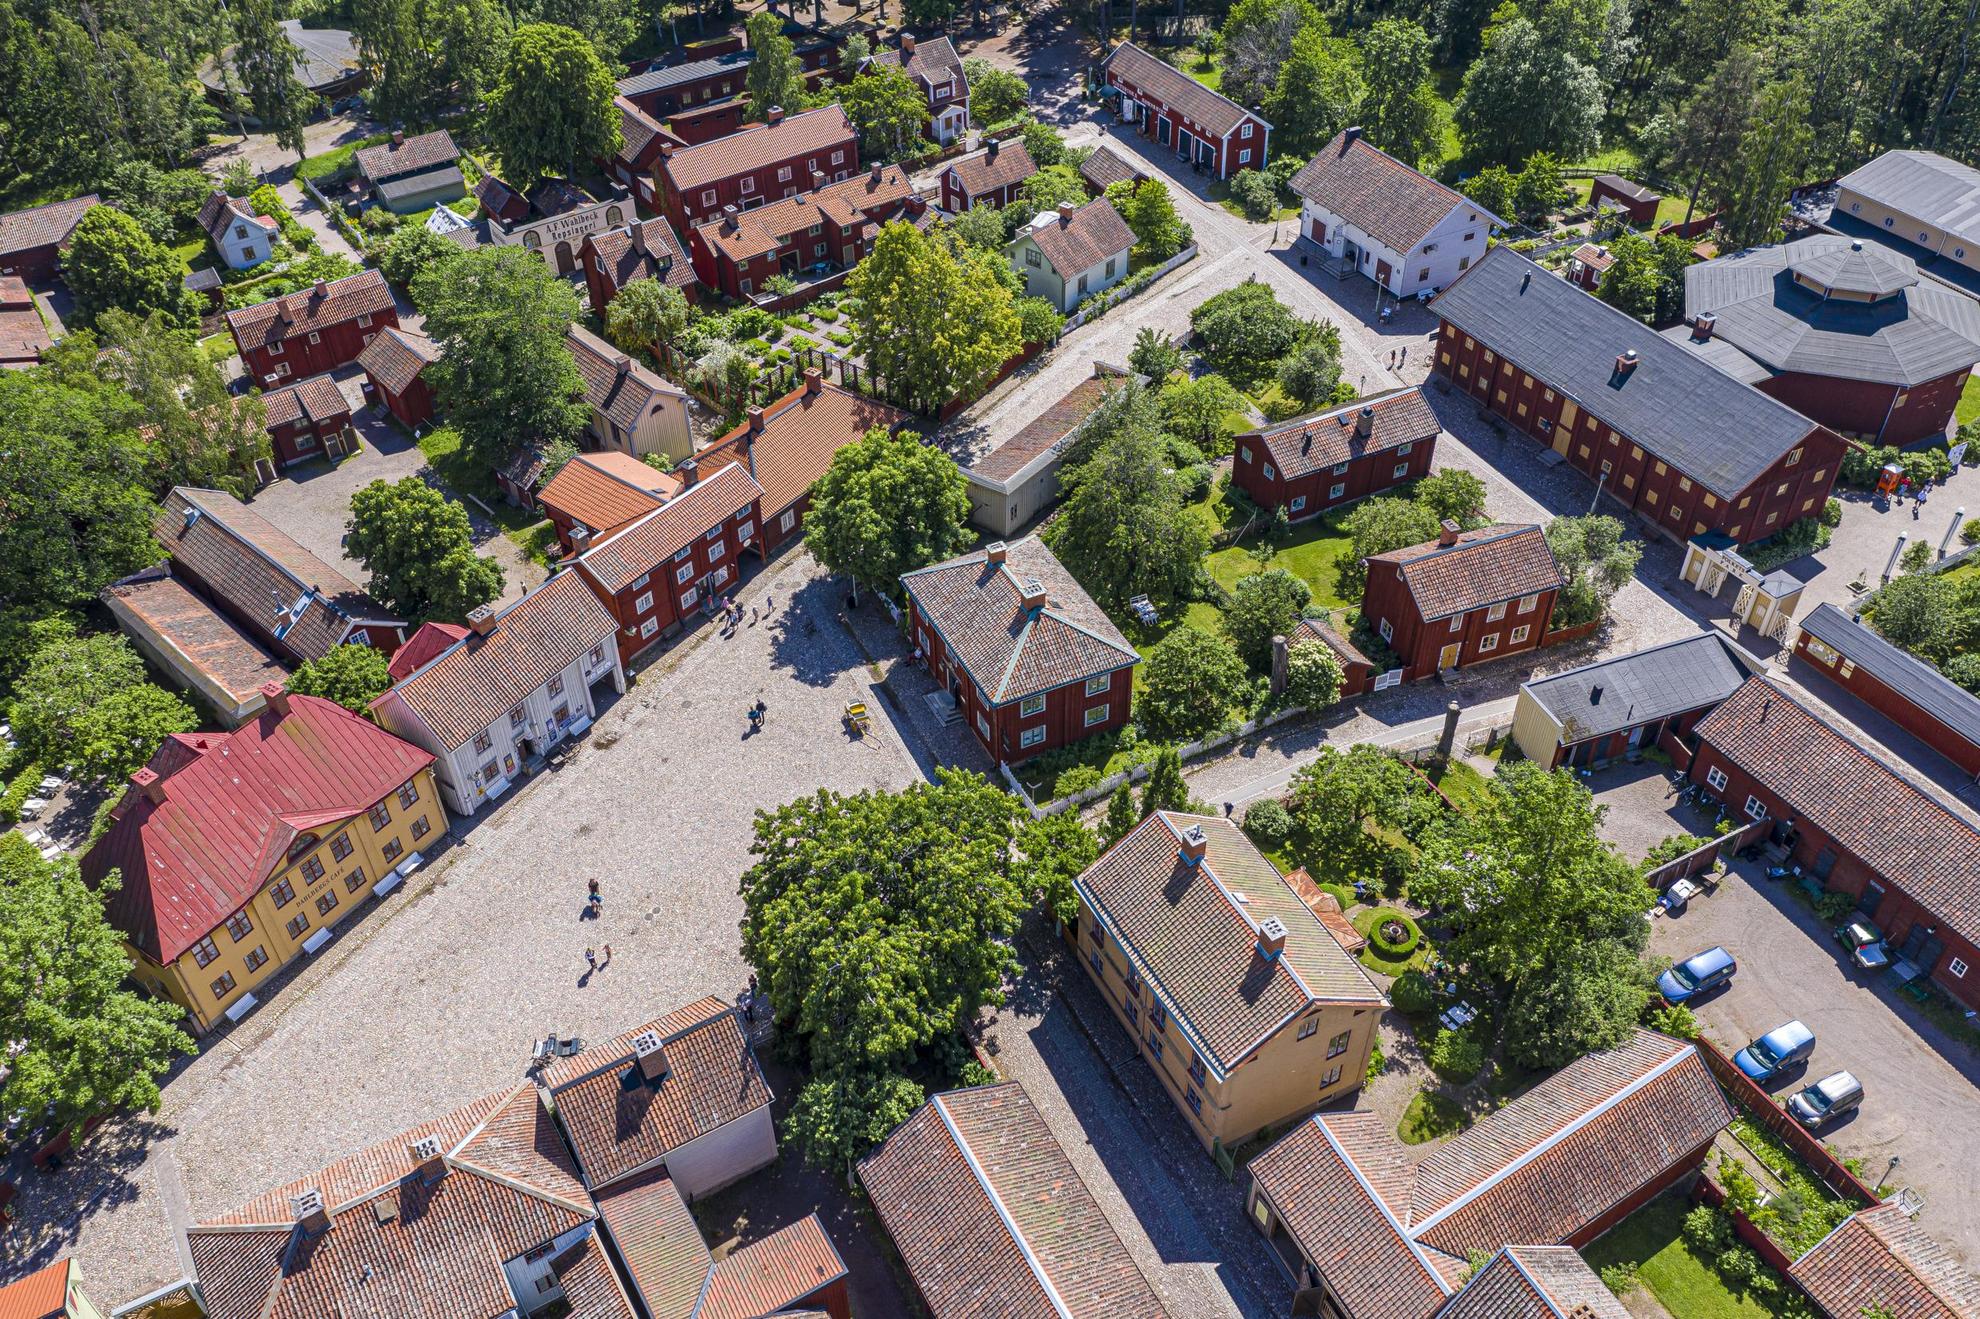 Aerial view of the houses of Linköping’s old town.